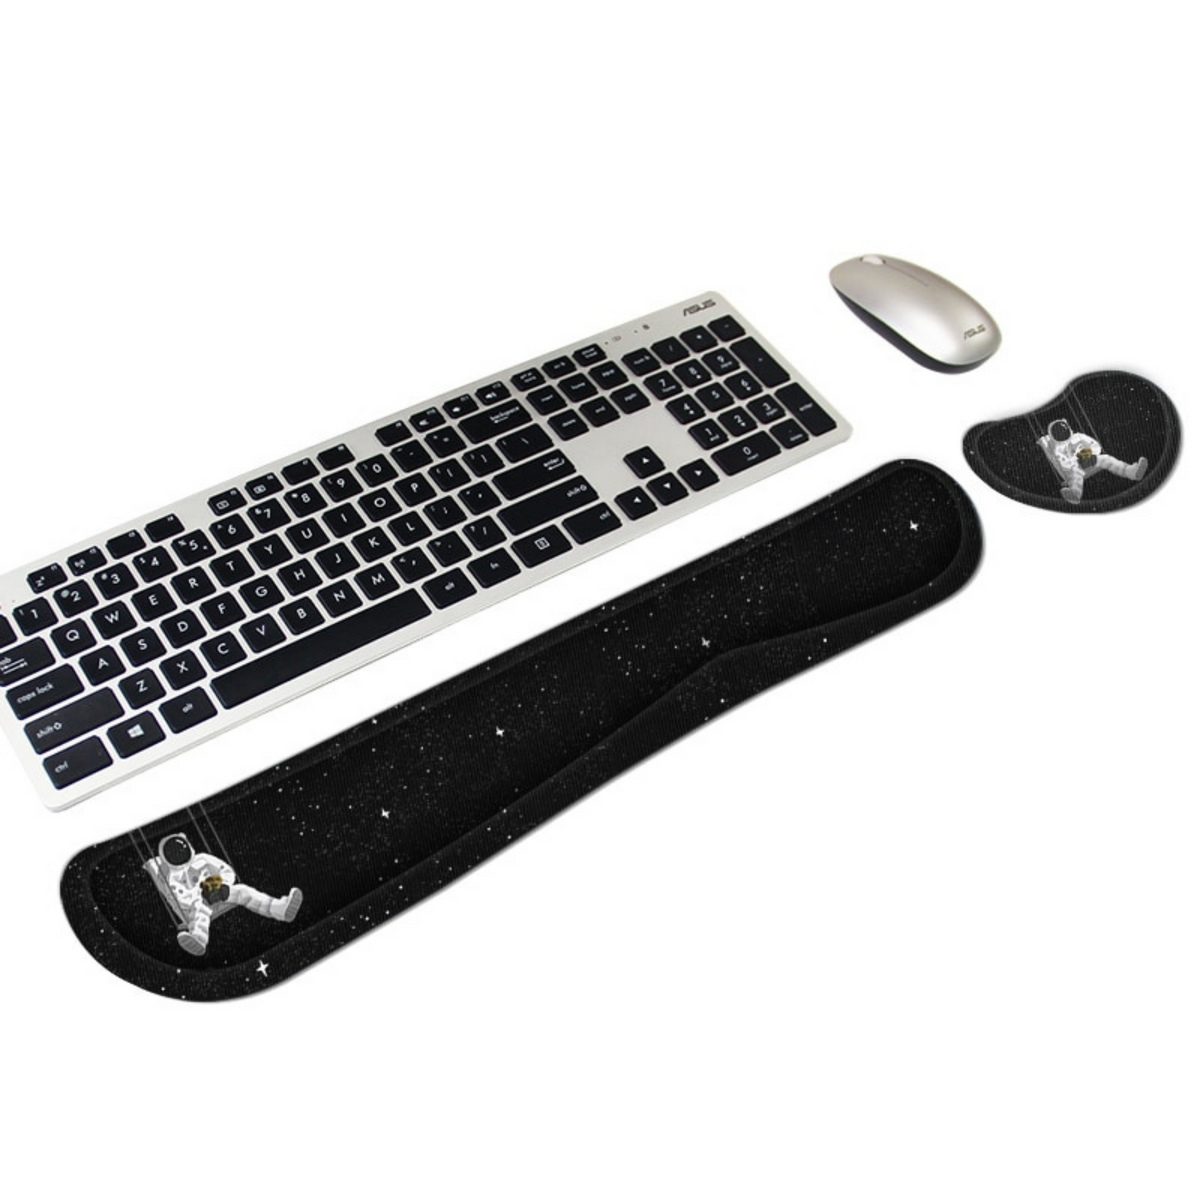 Ergonomic Keyboard Wrist Rest For Wrist Support With Padded Cushion for Home Or Office Work